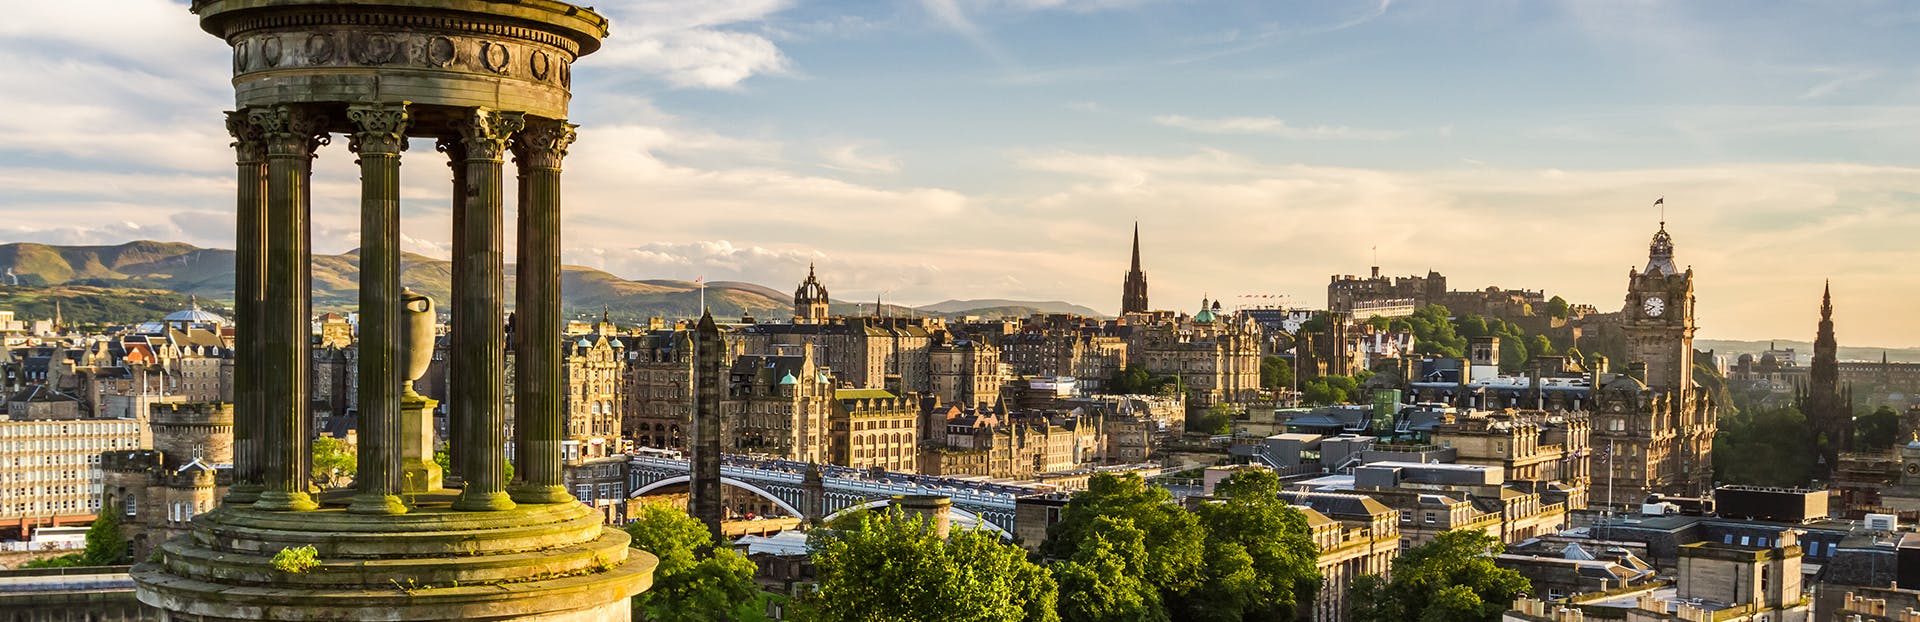 Discover Edinburgh's New Town on a self-guided audio tour